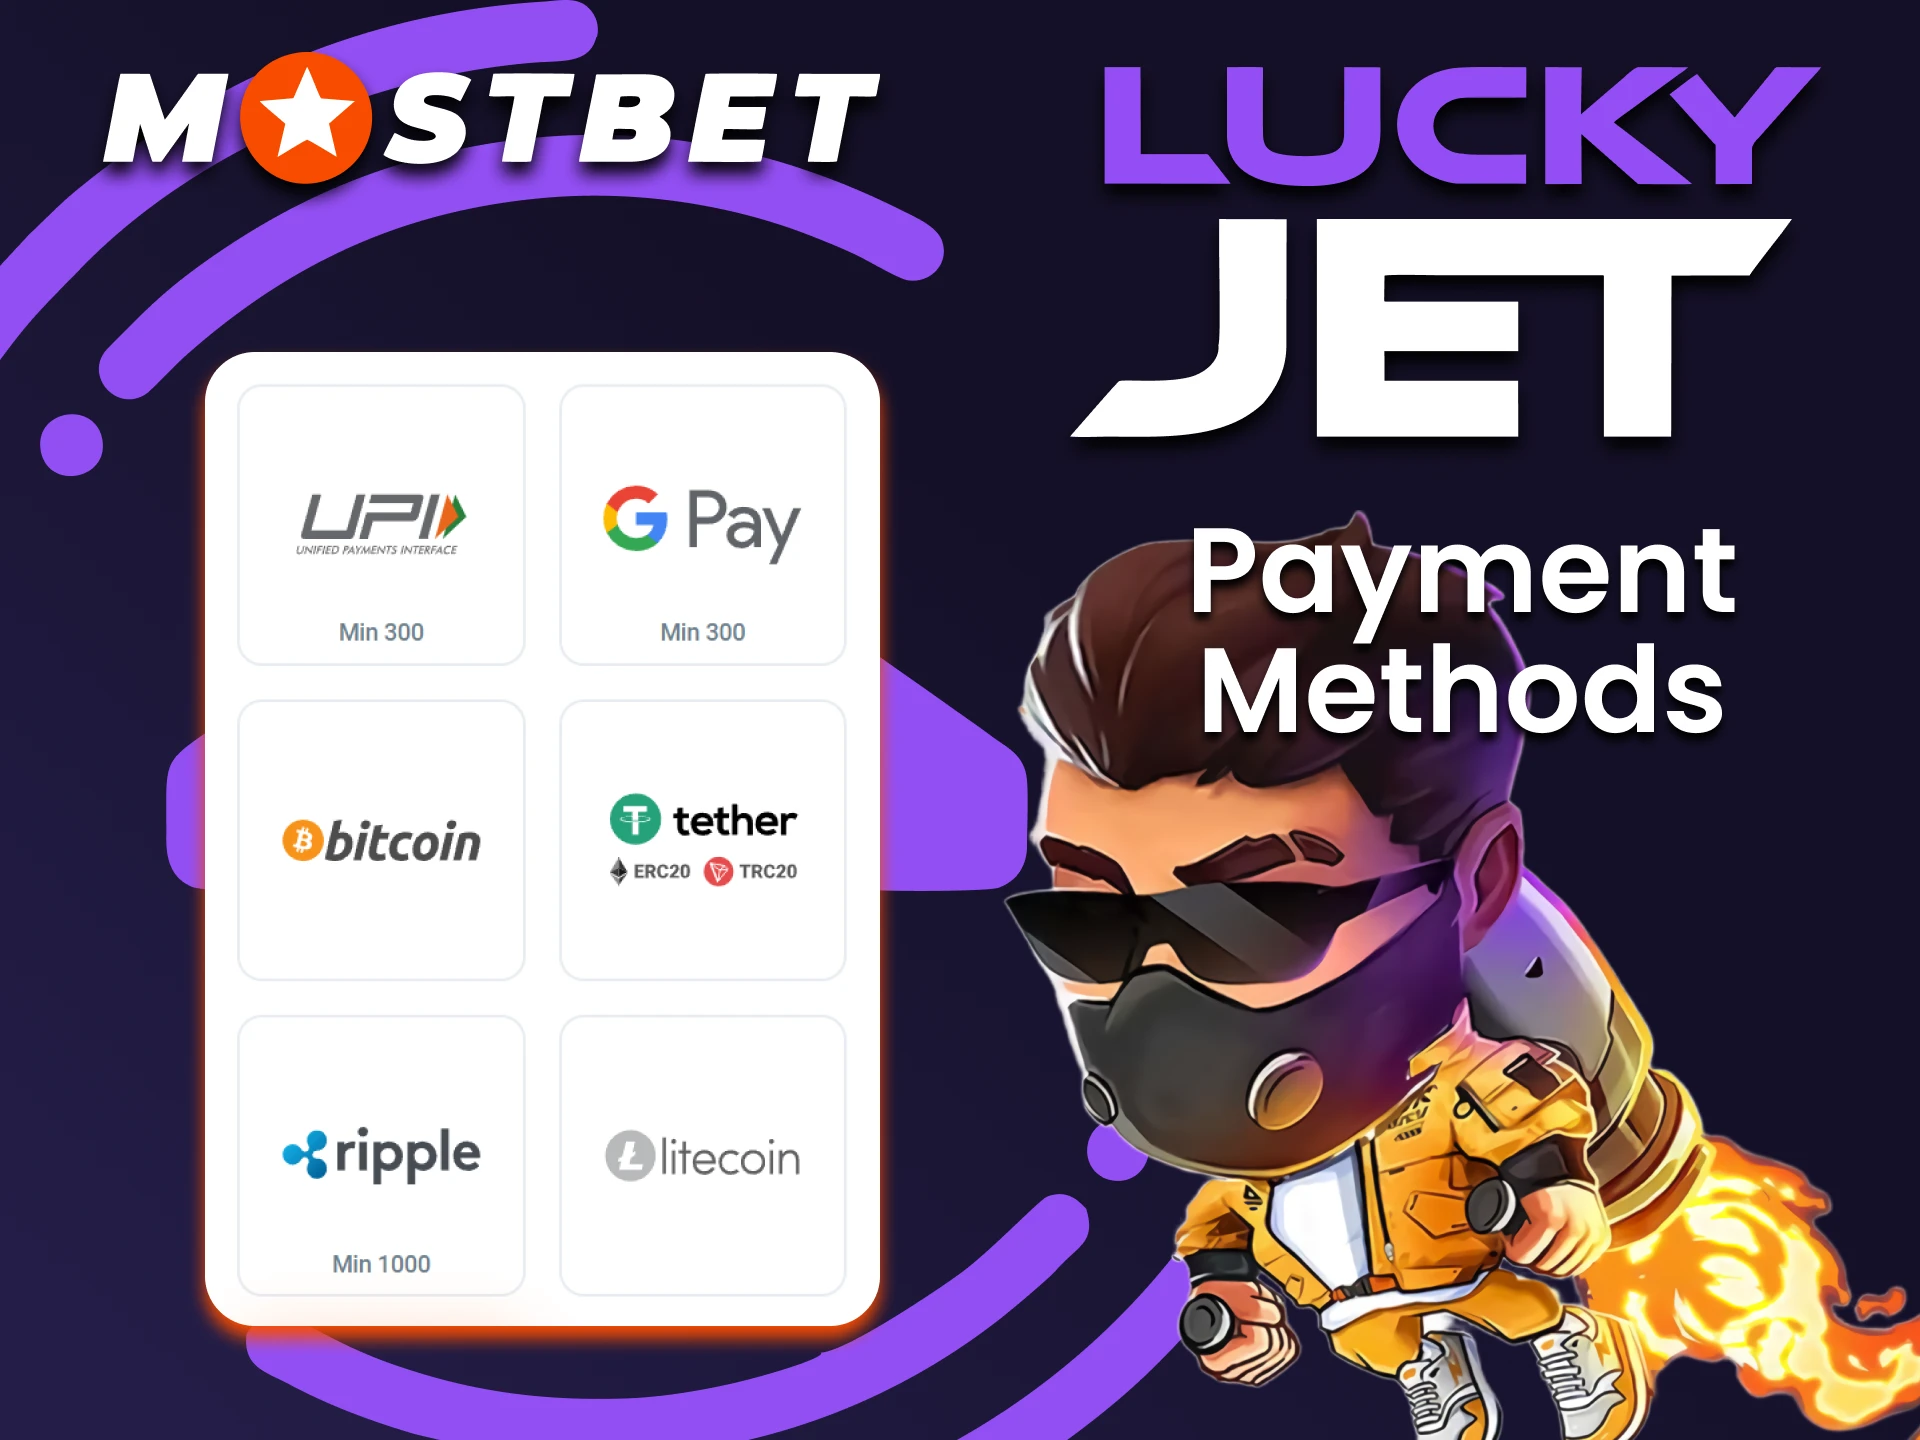 Use the convenient way to transfer funds for the game Lucky Jet from Mostbet.